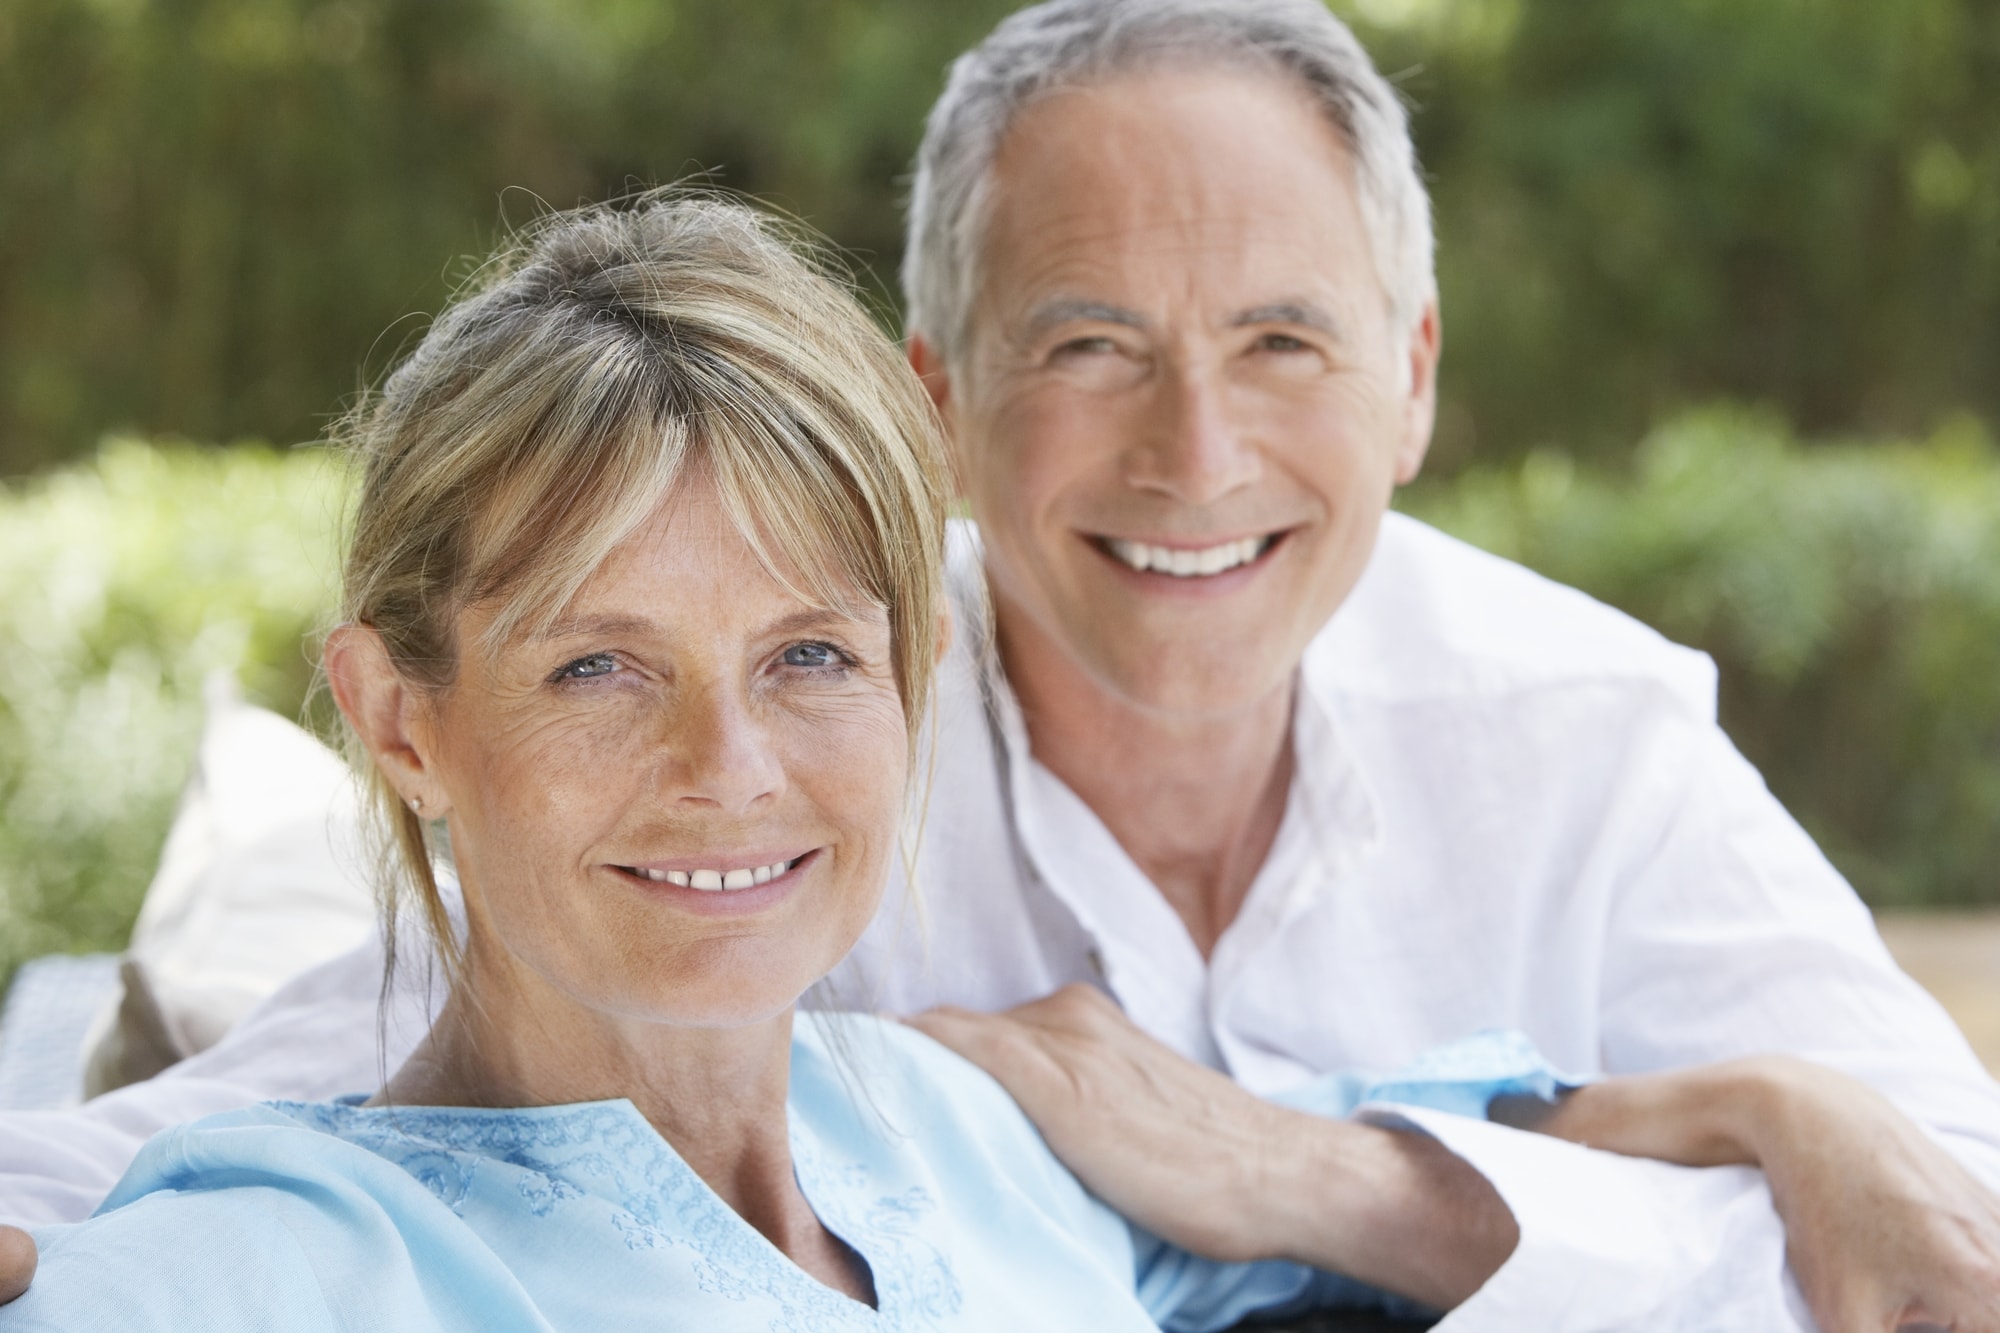 Reasons why more baby boomers are having cosmetic surgery